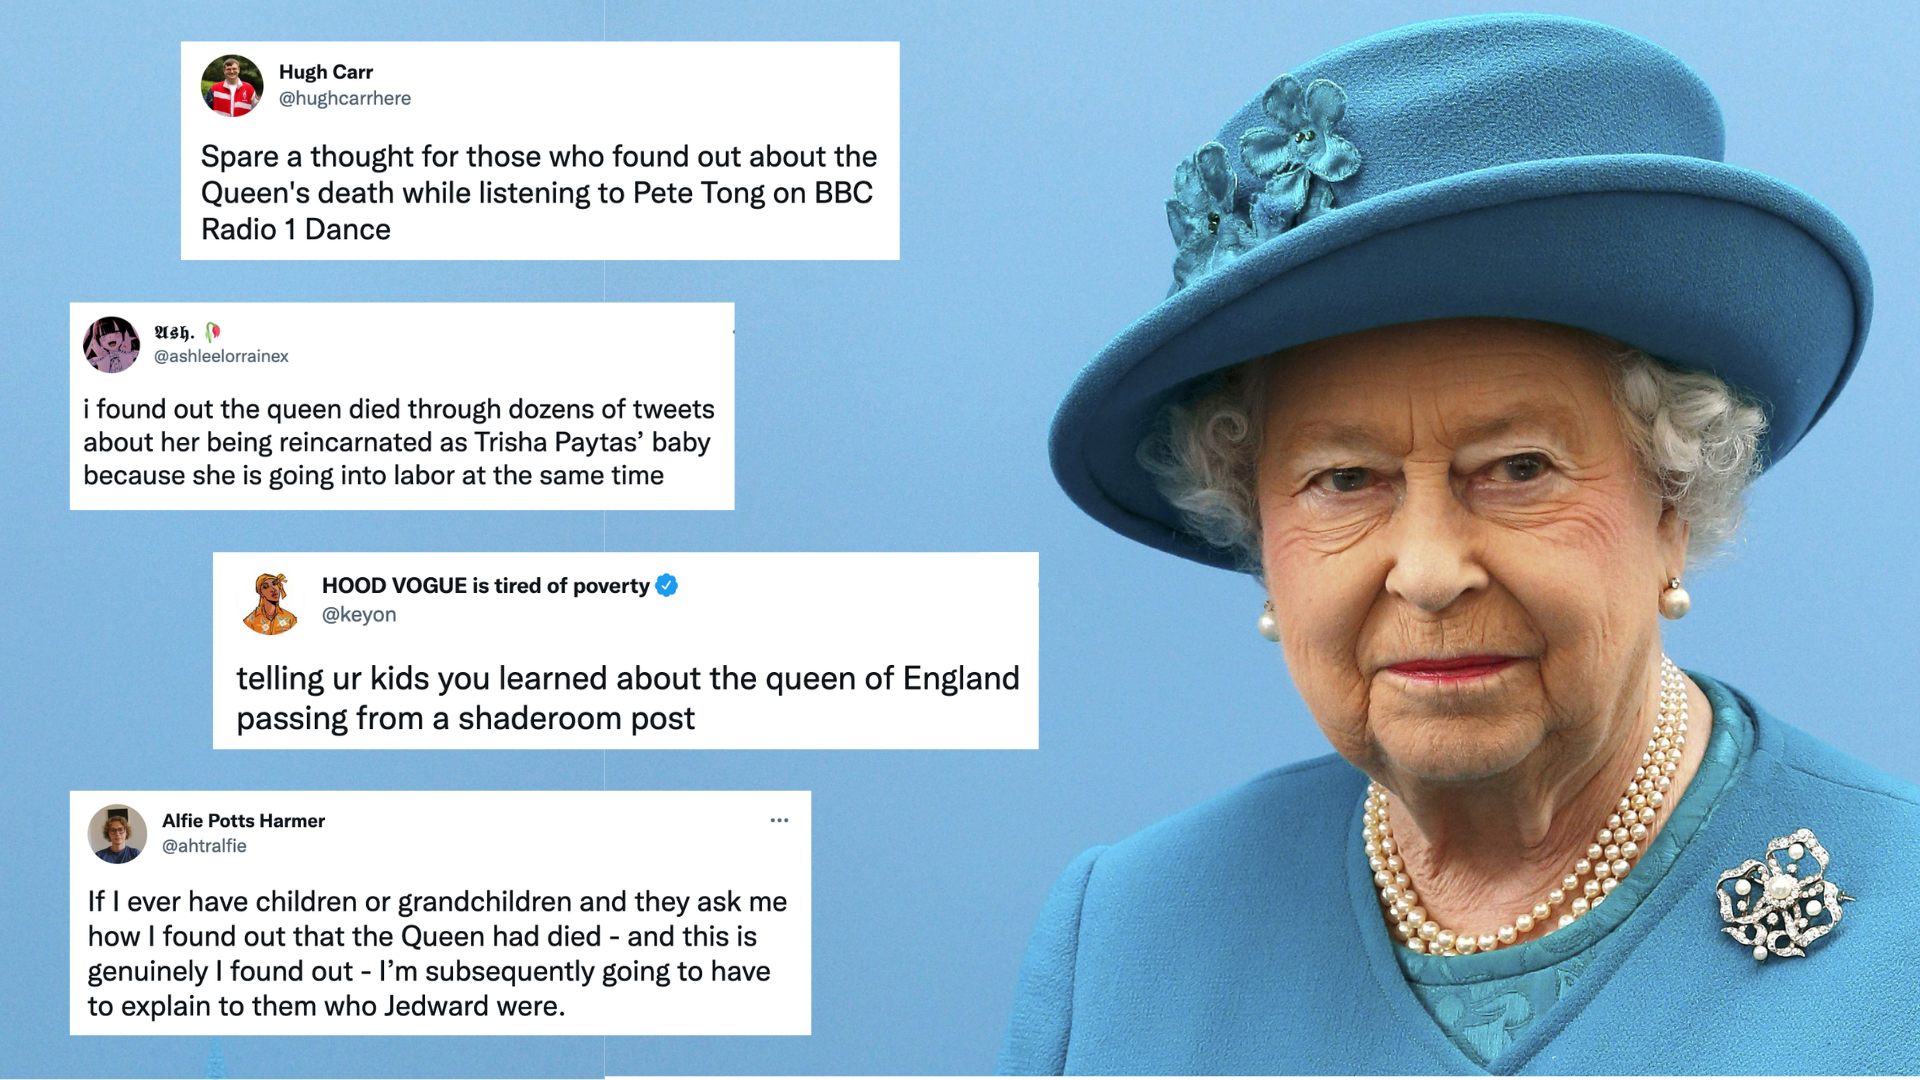 All the strange ways people found out about Queen Elizabeth II’s death via the internet